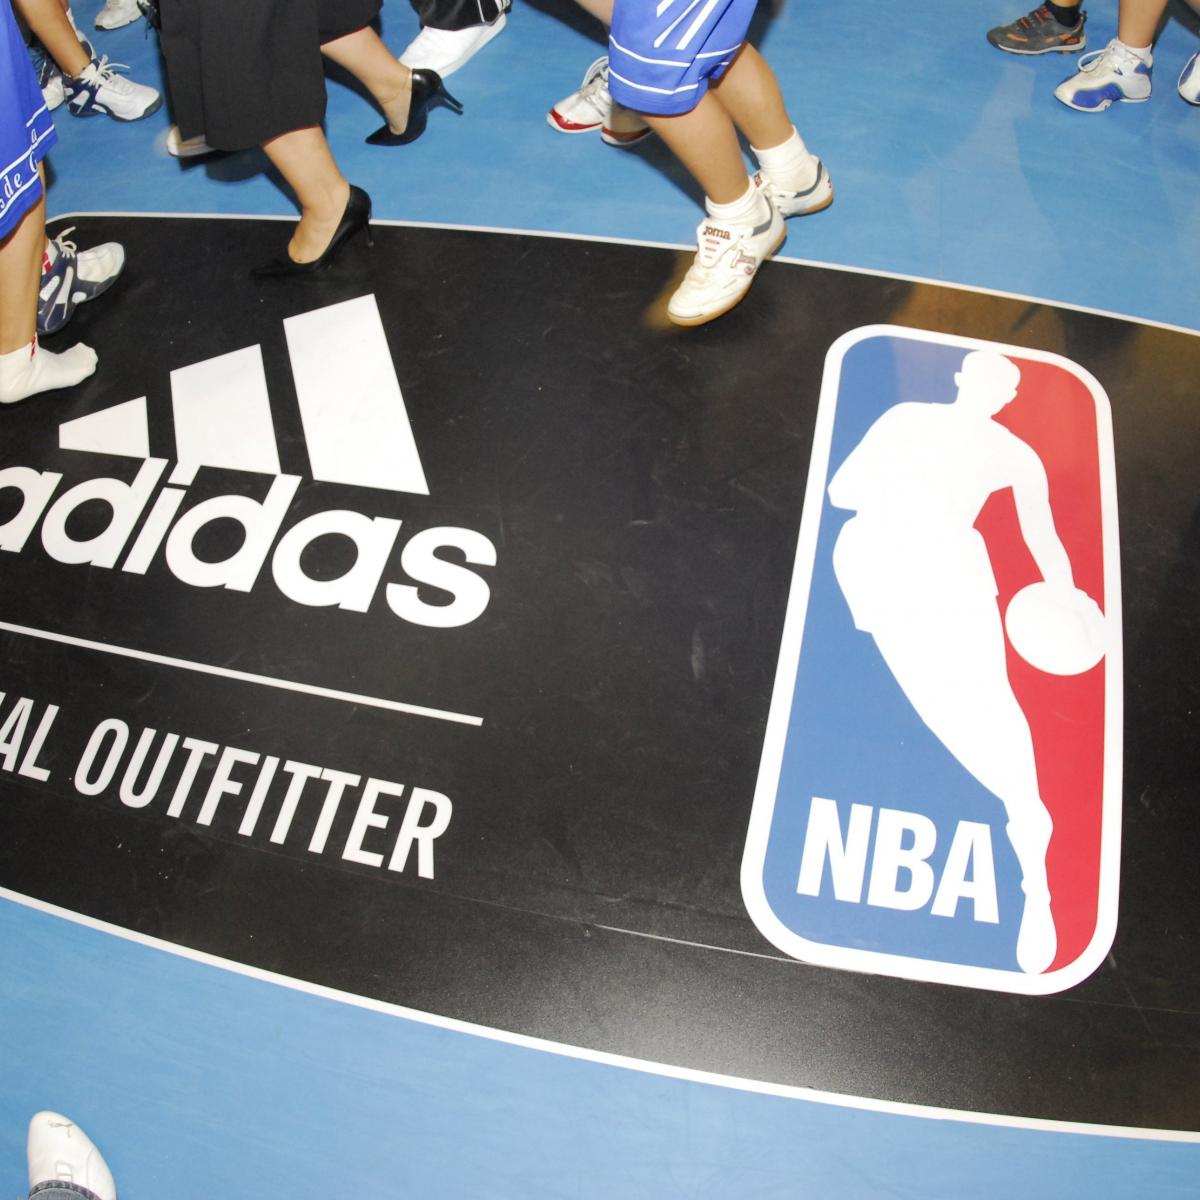 Nba S Contract With Adidas Will Not Be Renewed After 16 17 Season Bleacher Report Latest News Videos And Highlights